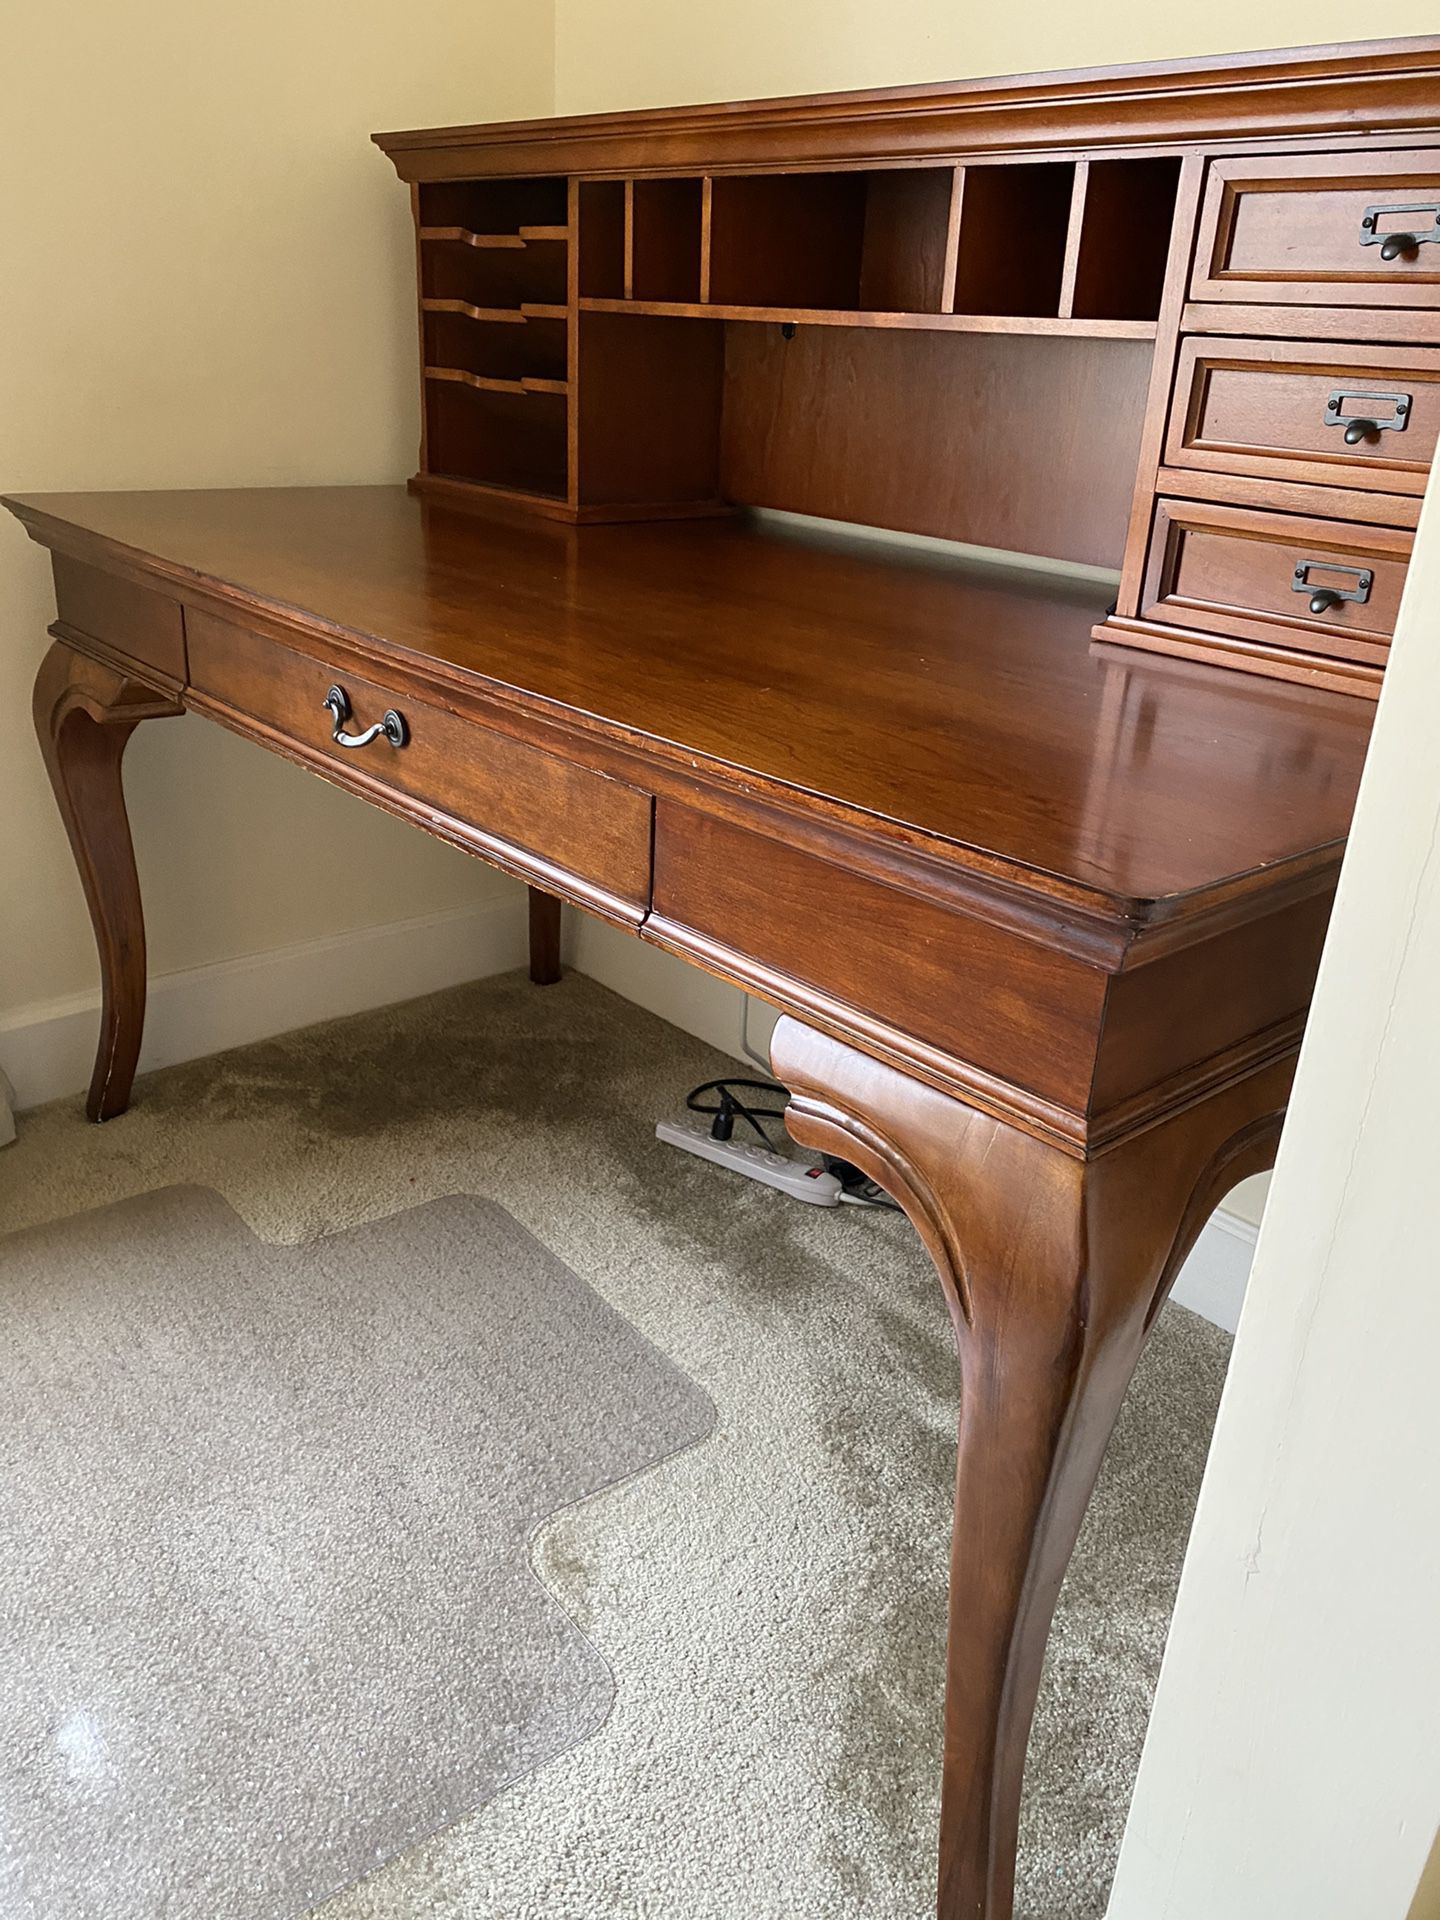 Credenza desk with removable hutch and matching 2 drawer file cabinet.